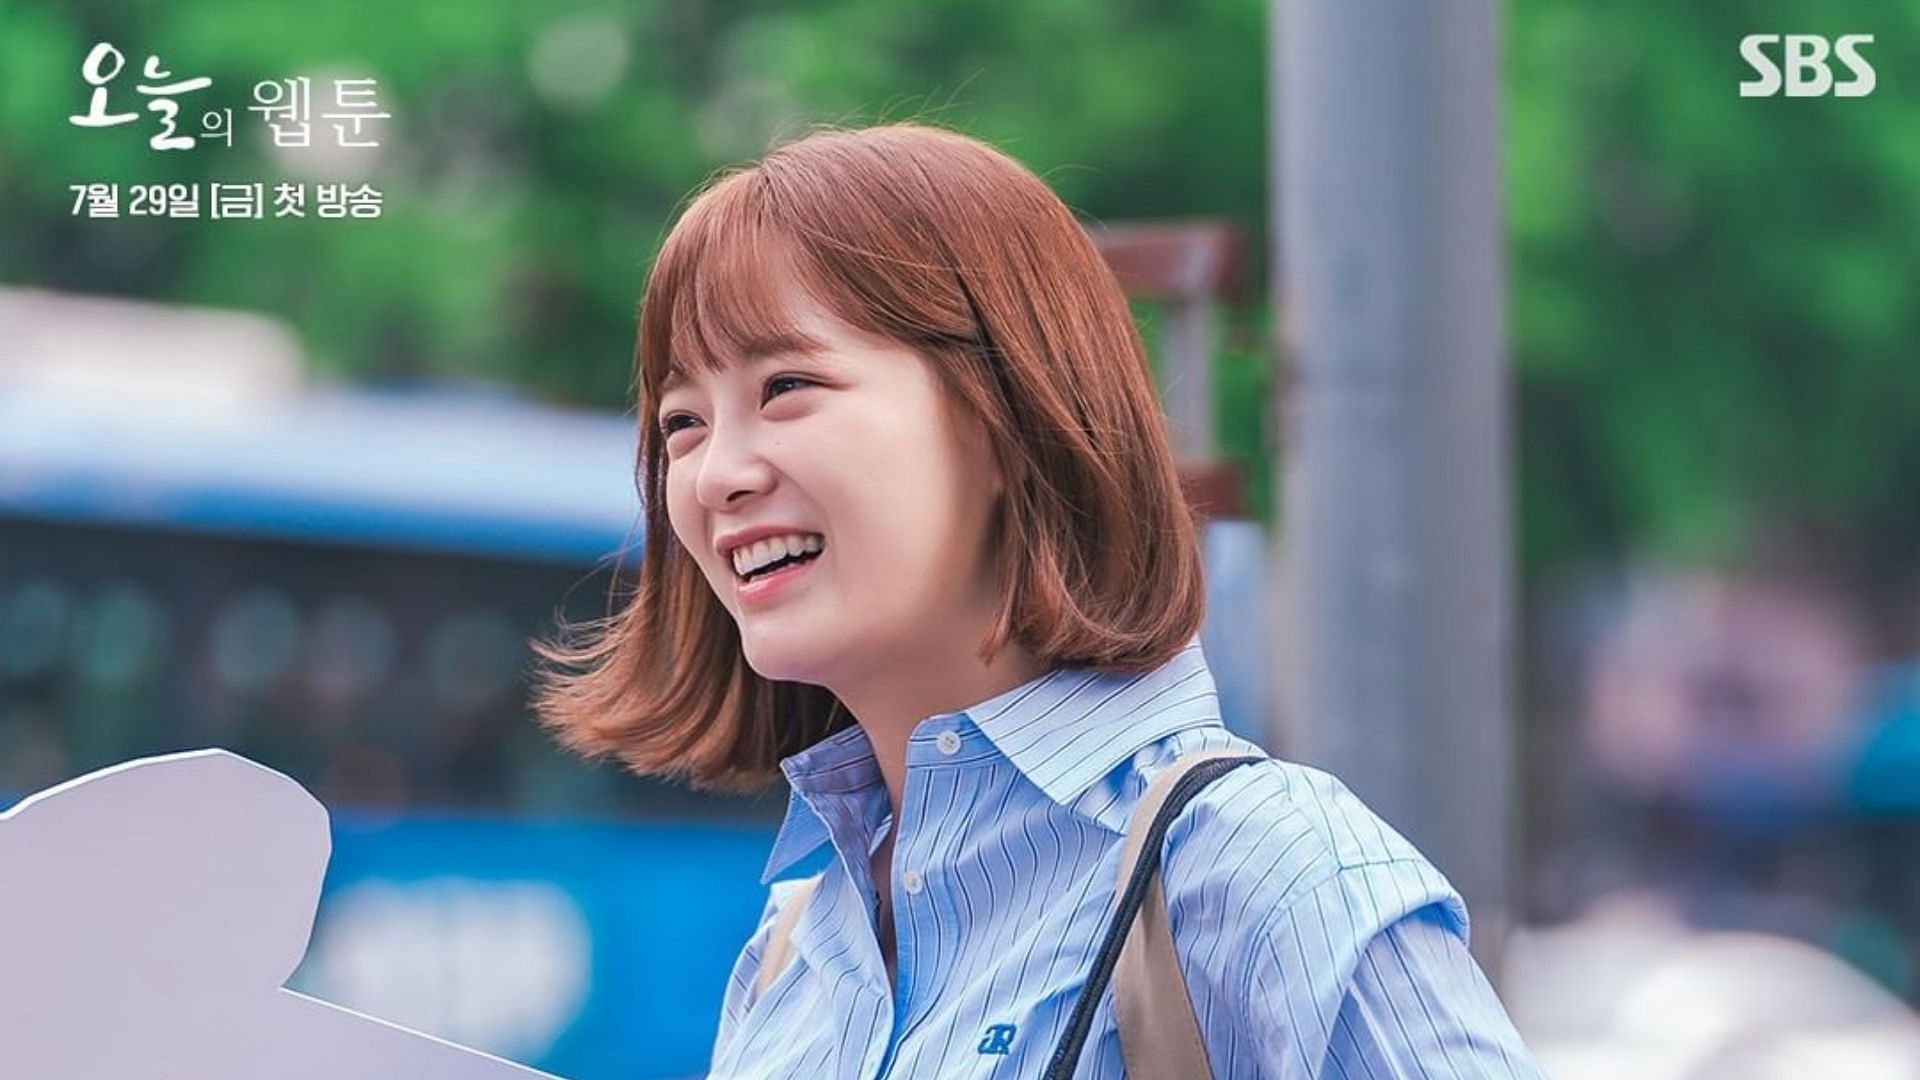 A still of Kim Se-jeong from her upcoming show (Image via sbsdrama. Official/Instagram)